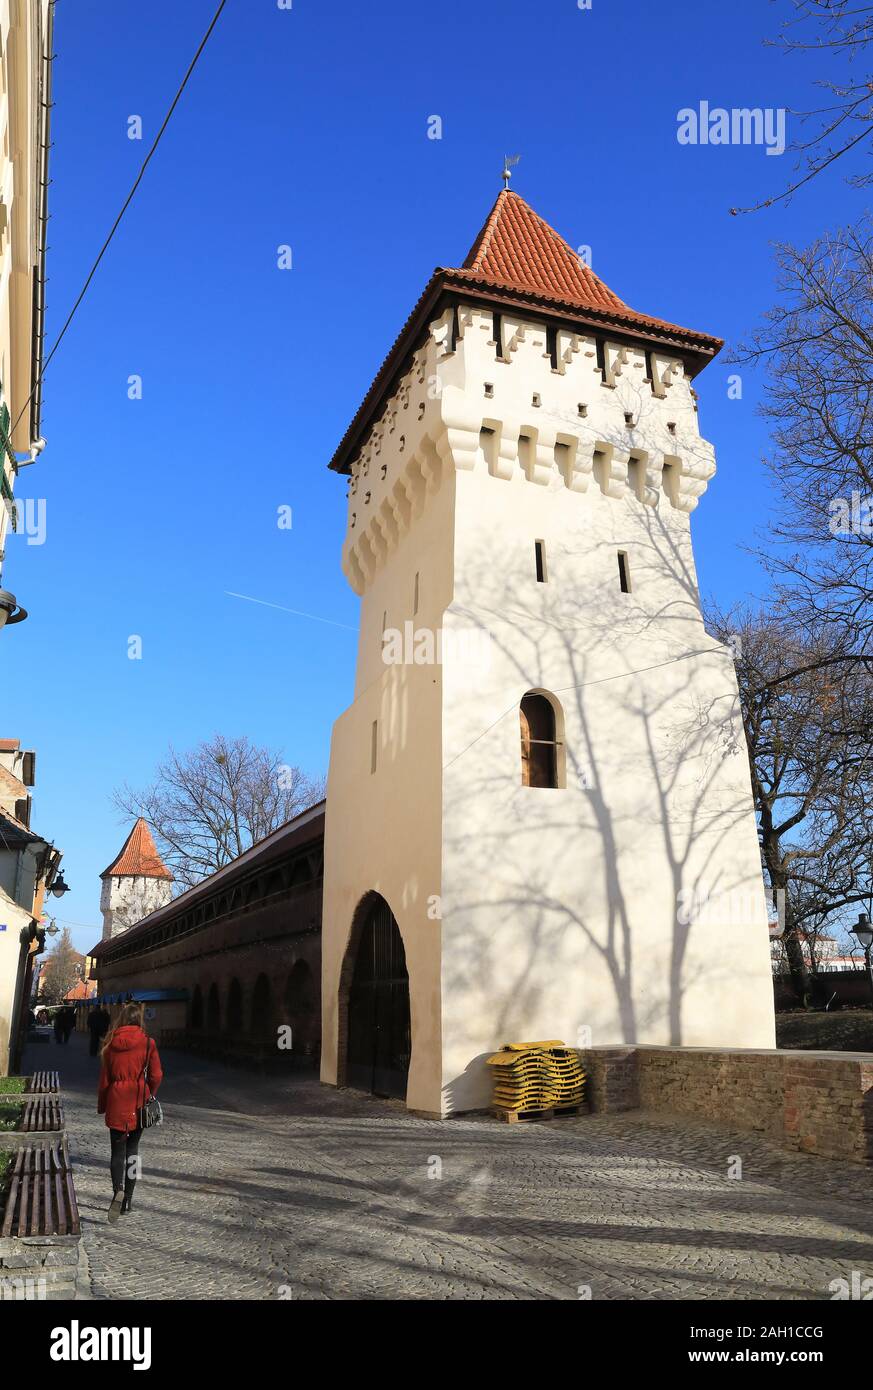 Winter sunshine on the medieval Potters Tower in the City Wall in Sibiu's Old Town, in Transylvania, Romania Stock Photo